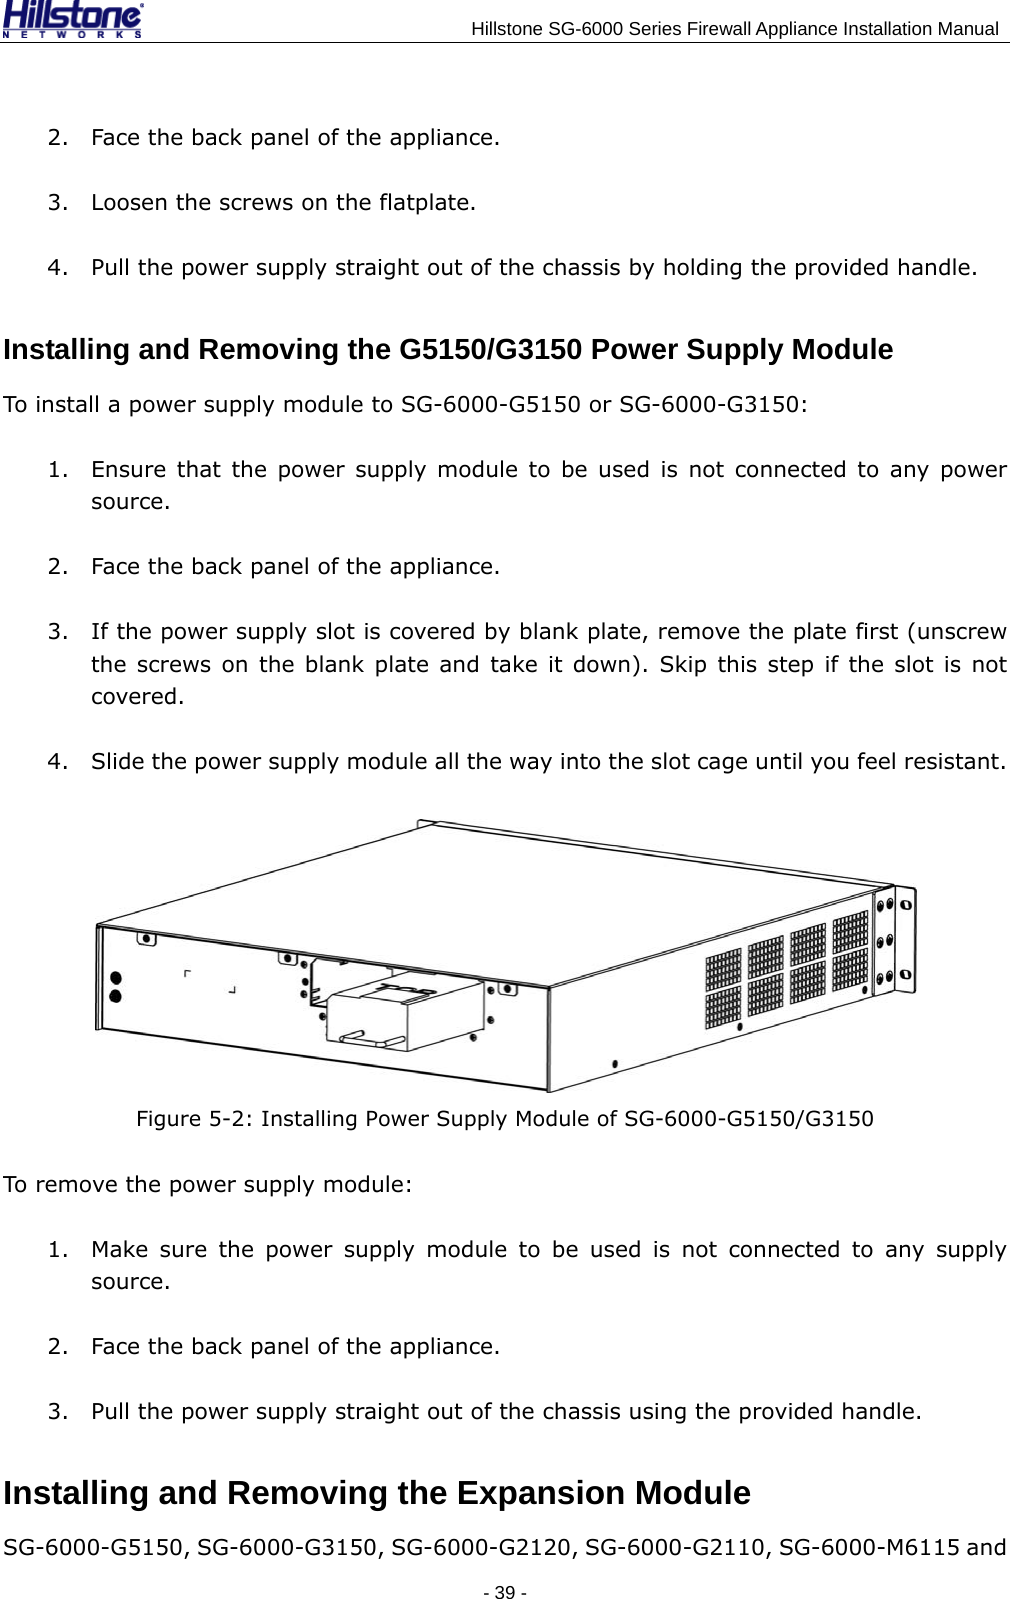                                    Hillstone SG-6000 Series Firewall Appliance Installation Manual 2. Face the back panel of the appliance. 3. Loosen the screws on the flatplate. 4. Pull the power supply straight out of the chassis by holding the provided handle. Installing and Removing the G5150/G3150 Power Supply Module To install a power supply module to SG-6000-G5150 or SG-6000-G3150: 1. Ensure that the power supply module to be used is not connected to any power source. 2. Face the back panel of the appliance. 3. If the power supply slot is covered by blank plate, remove the plate first (unscrew the screws on the blank plate and take it down). Skip this step if the slot is not covered. 4. Slide the power supply module all the way into the slot cage until you feel resistant.  Figure 5-2: Installing Power Supply Module of SG-6000-G5150/G3150 To remove the power supply module: 1. Make sure the power supply module to be used is not connected to any supply source. 2. Face the back panel of the appliance. 3. Pull the power supply straight out of the chassis using the provided handle. Installing and Removing the Expansion Module SG-6000-G5150, SG-6000-G3150, SG-6000-G2120, SG-6000-G2110, SG-6000-M6115 and - 39 -  